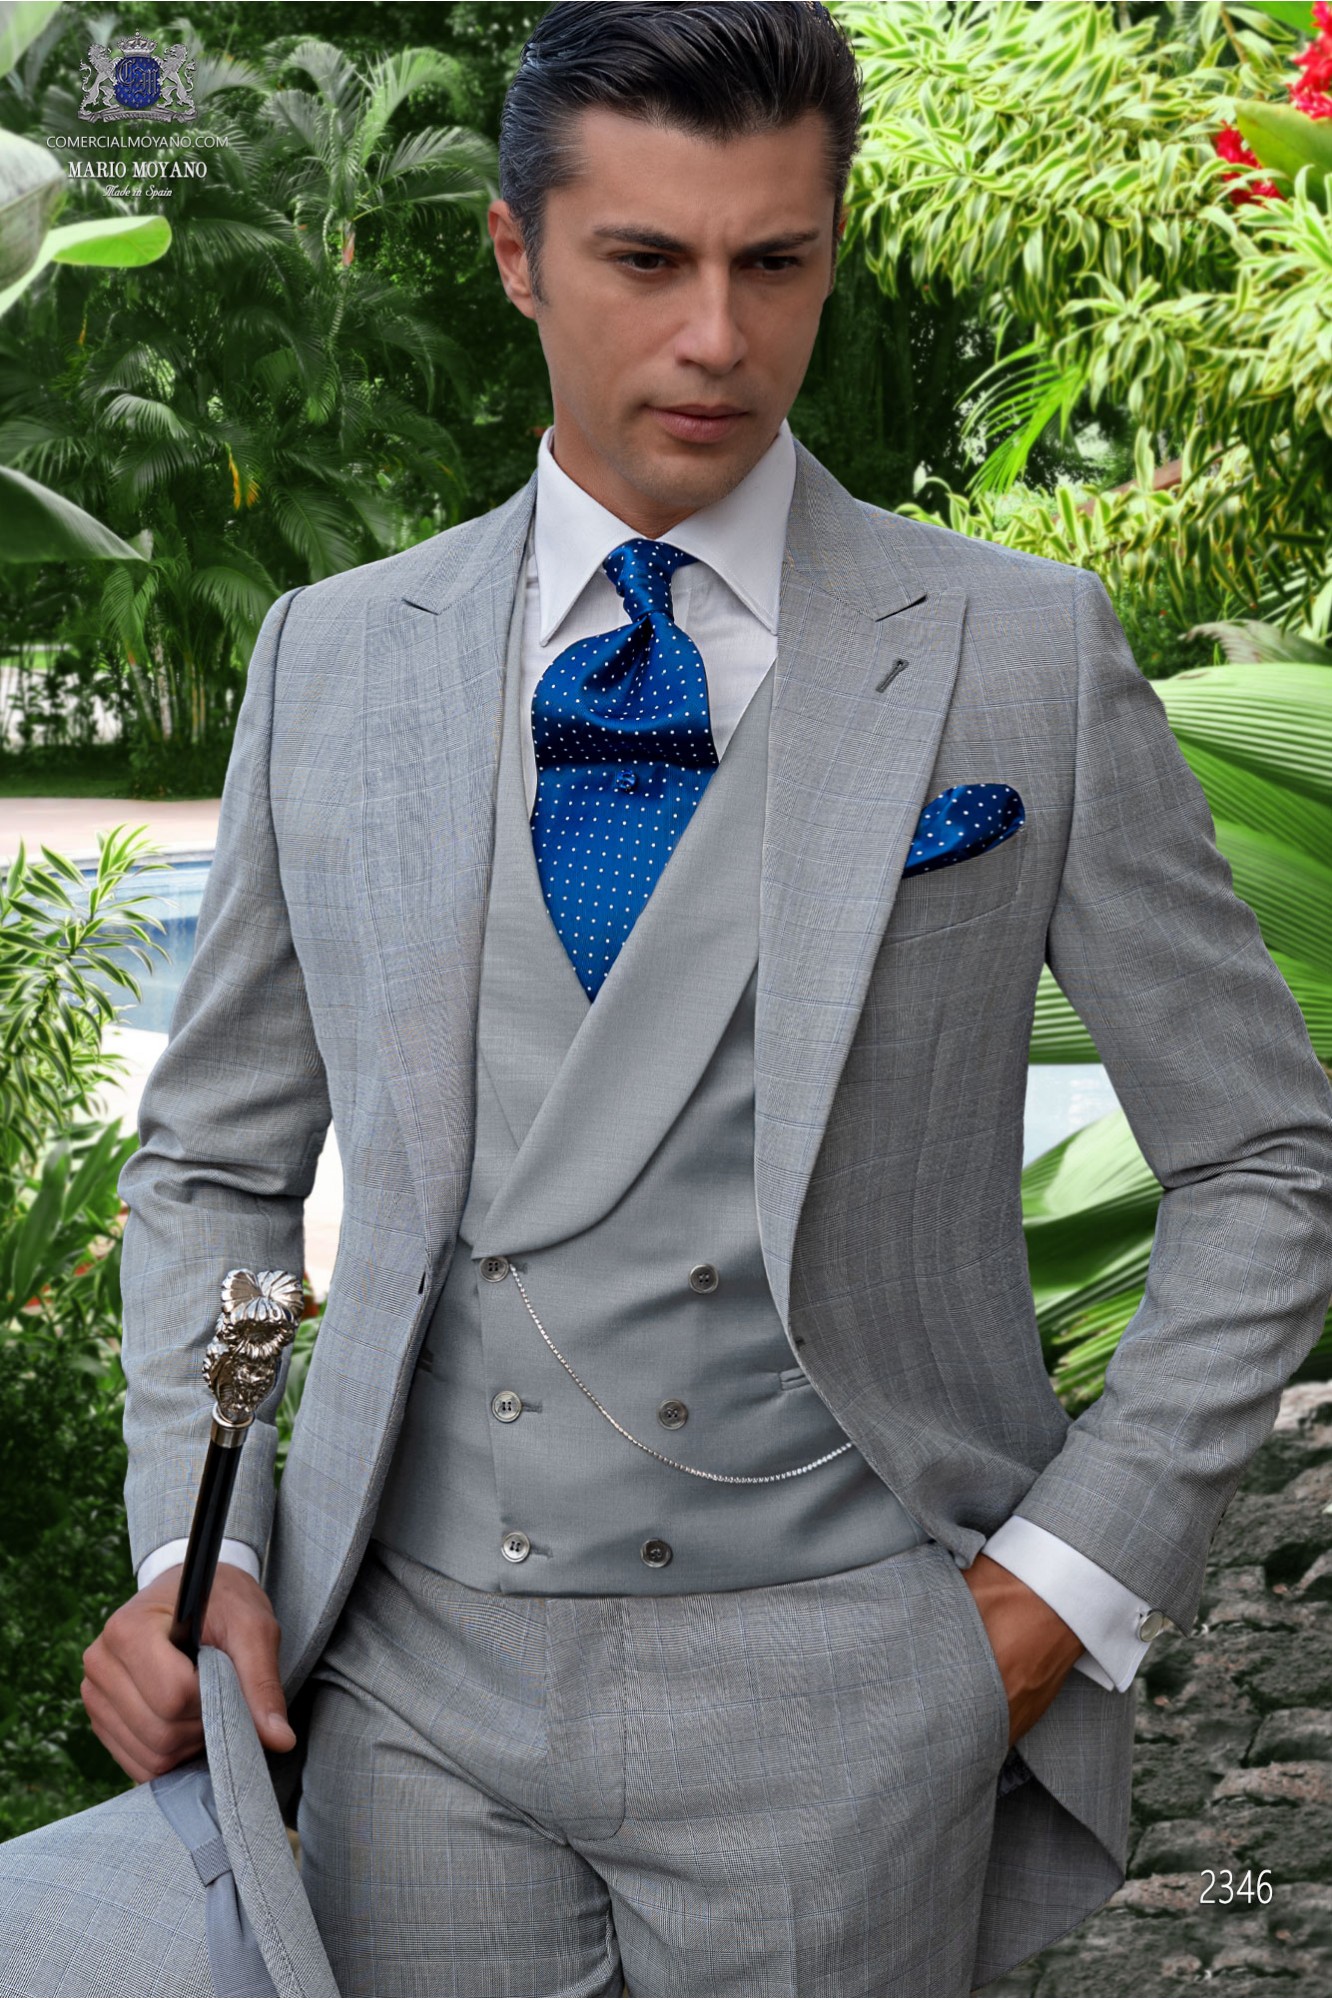 Bespoke Prince of Wales grey and blue morning suit